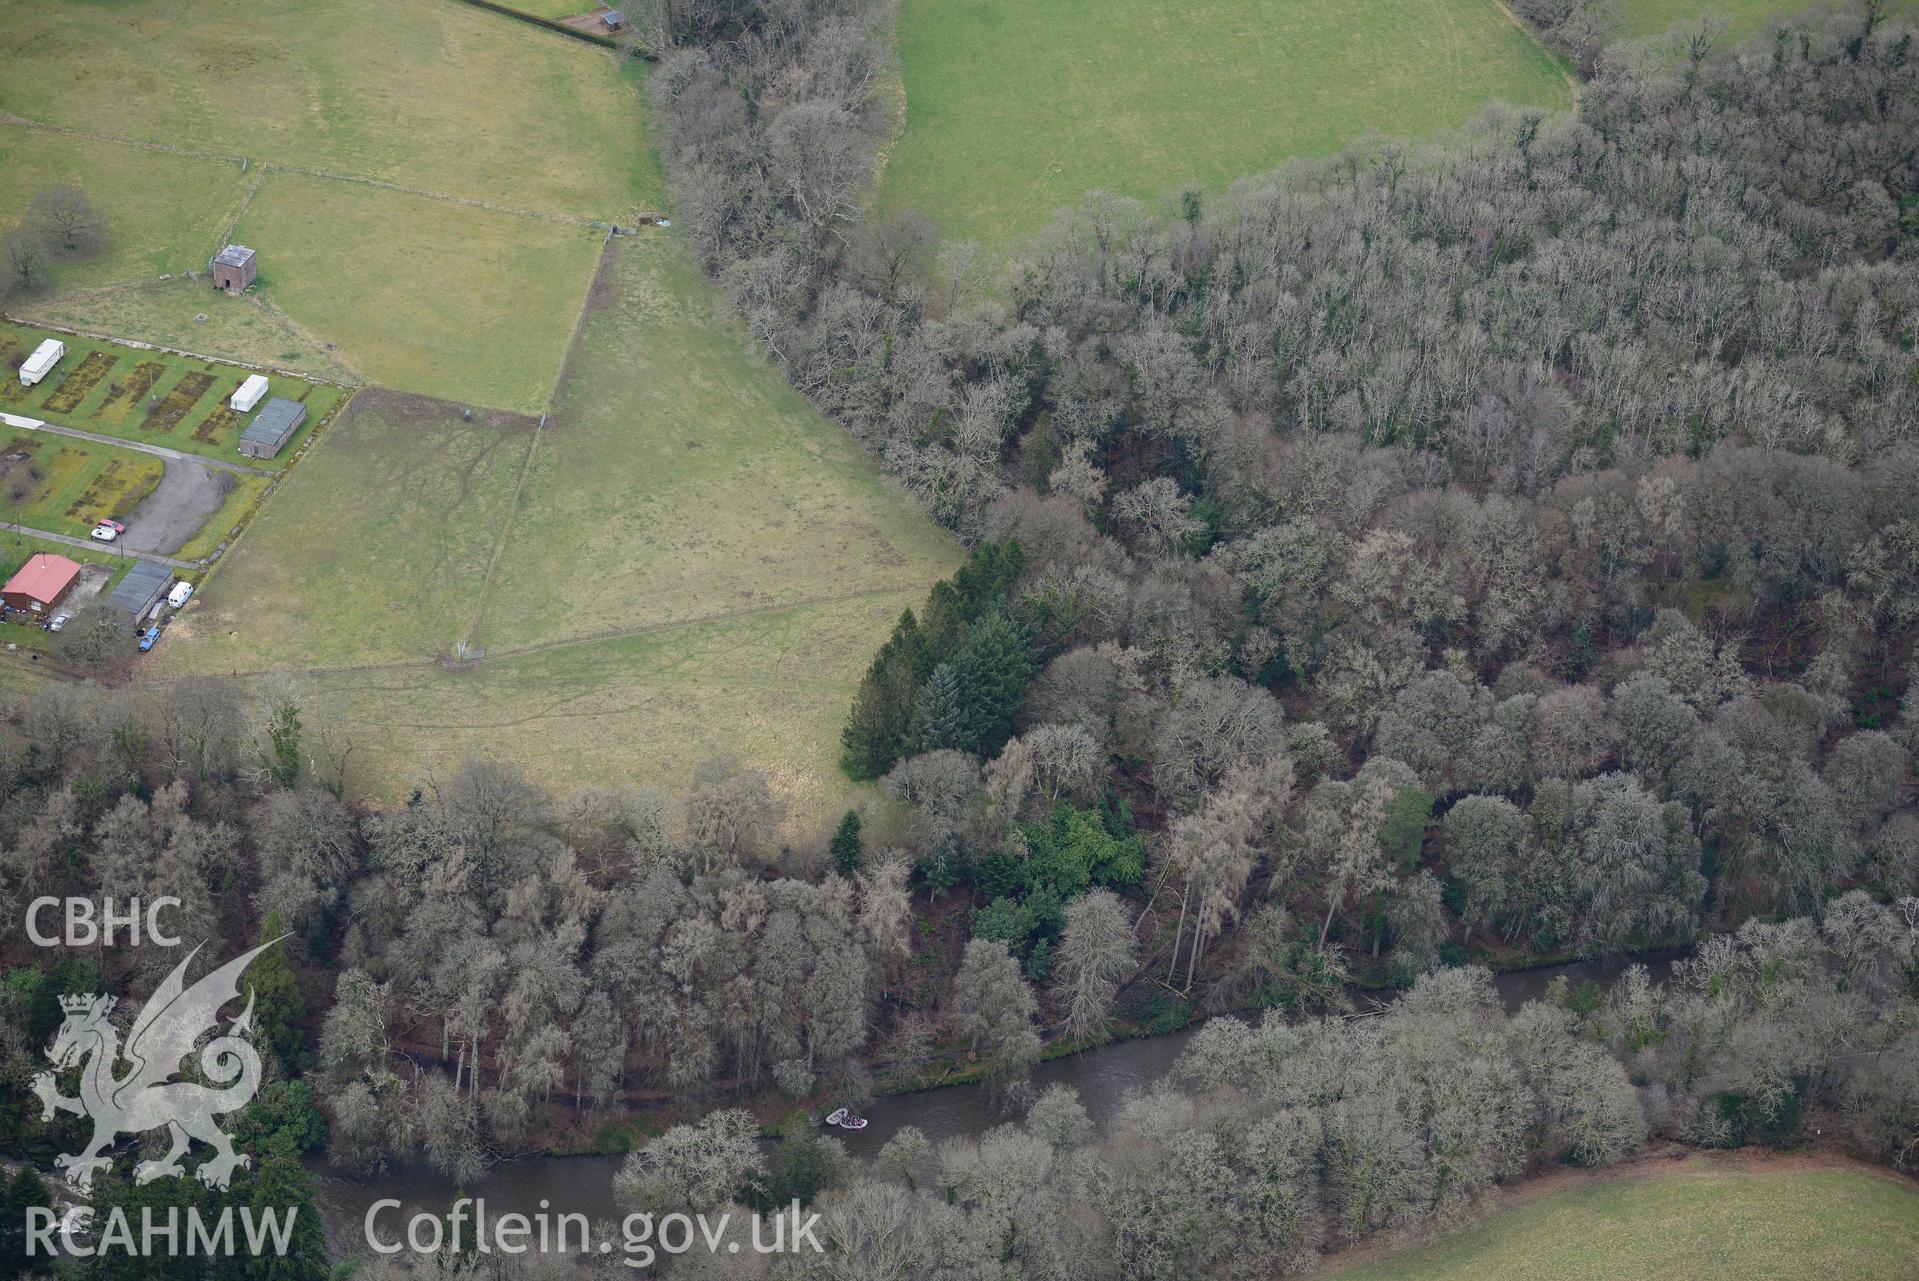 Caerau Hillfort and Henllan Bridge prisoner of war camp, Henllan, between Newcastle Emlyn and Llandysul. Oblique aerial photograph taken during the Royal Commission's programme of archaeological aerial reconnaissance by Toby Driver on 13th March 2015.